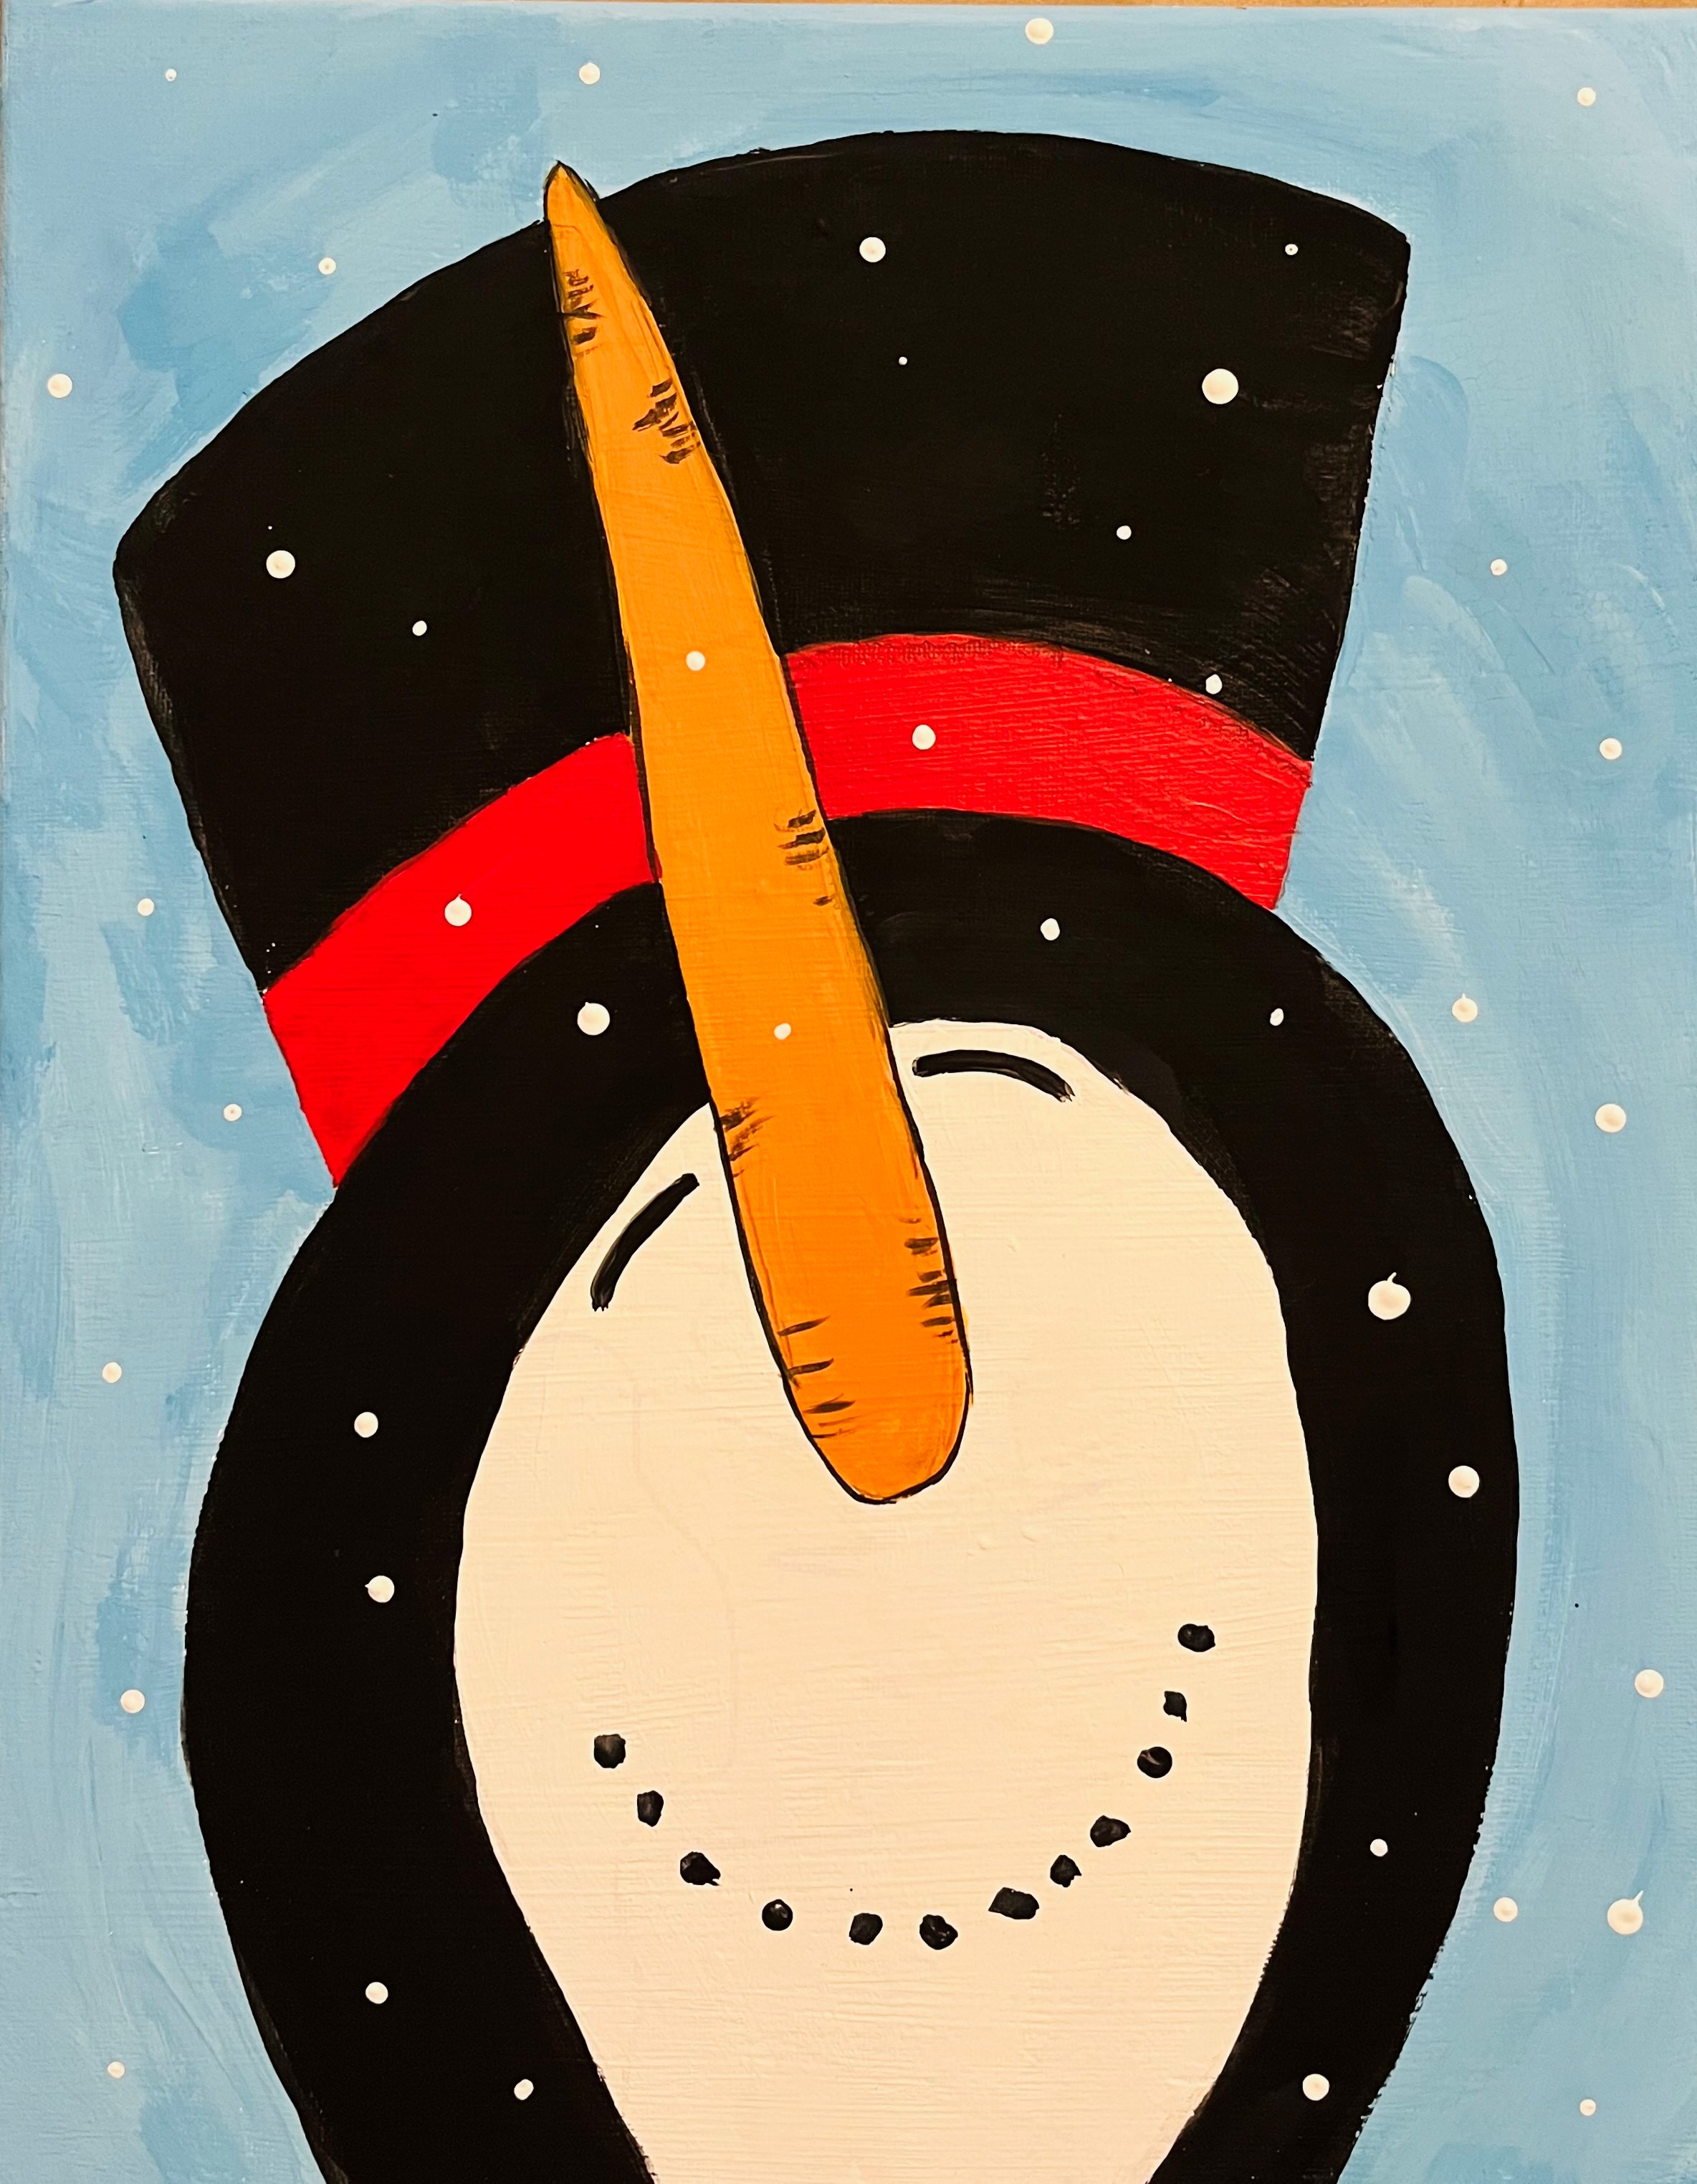 Smiling snowman with black hat, carrot nose painted on canvas.